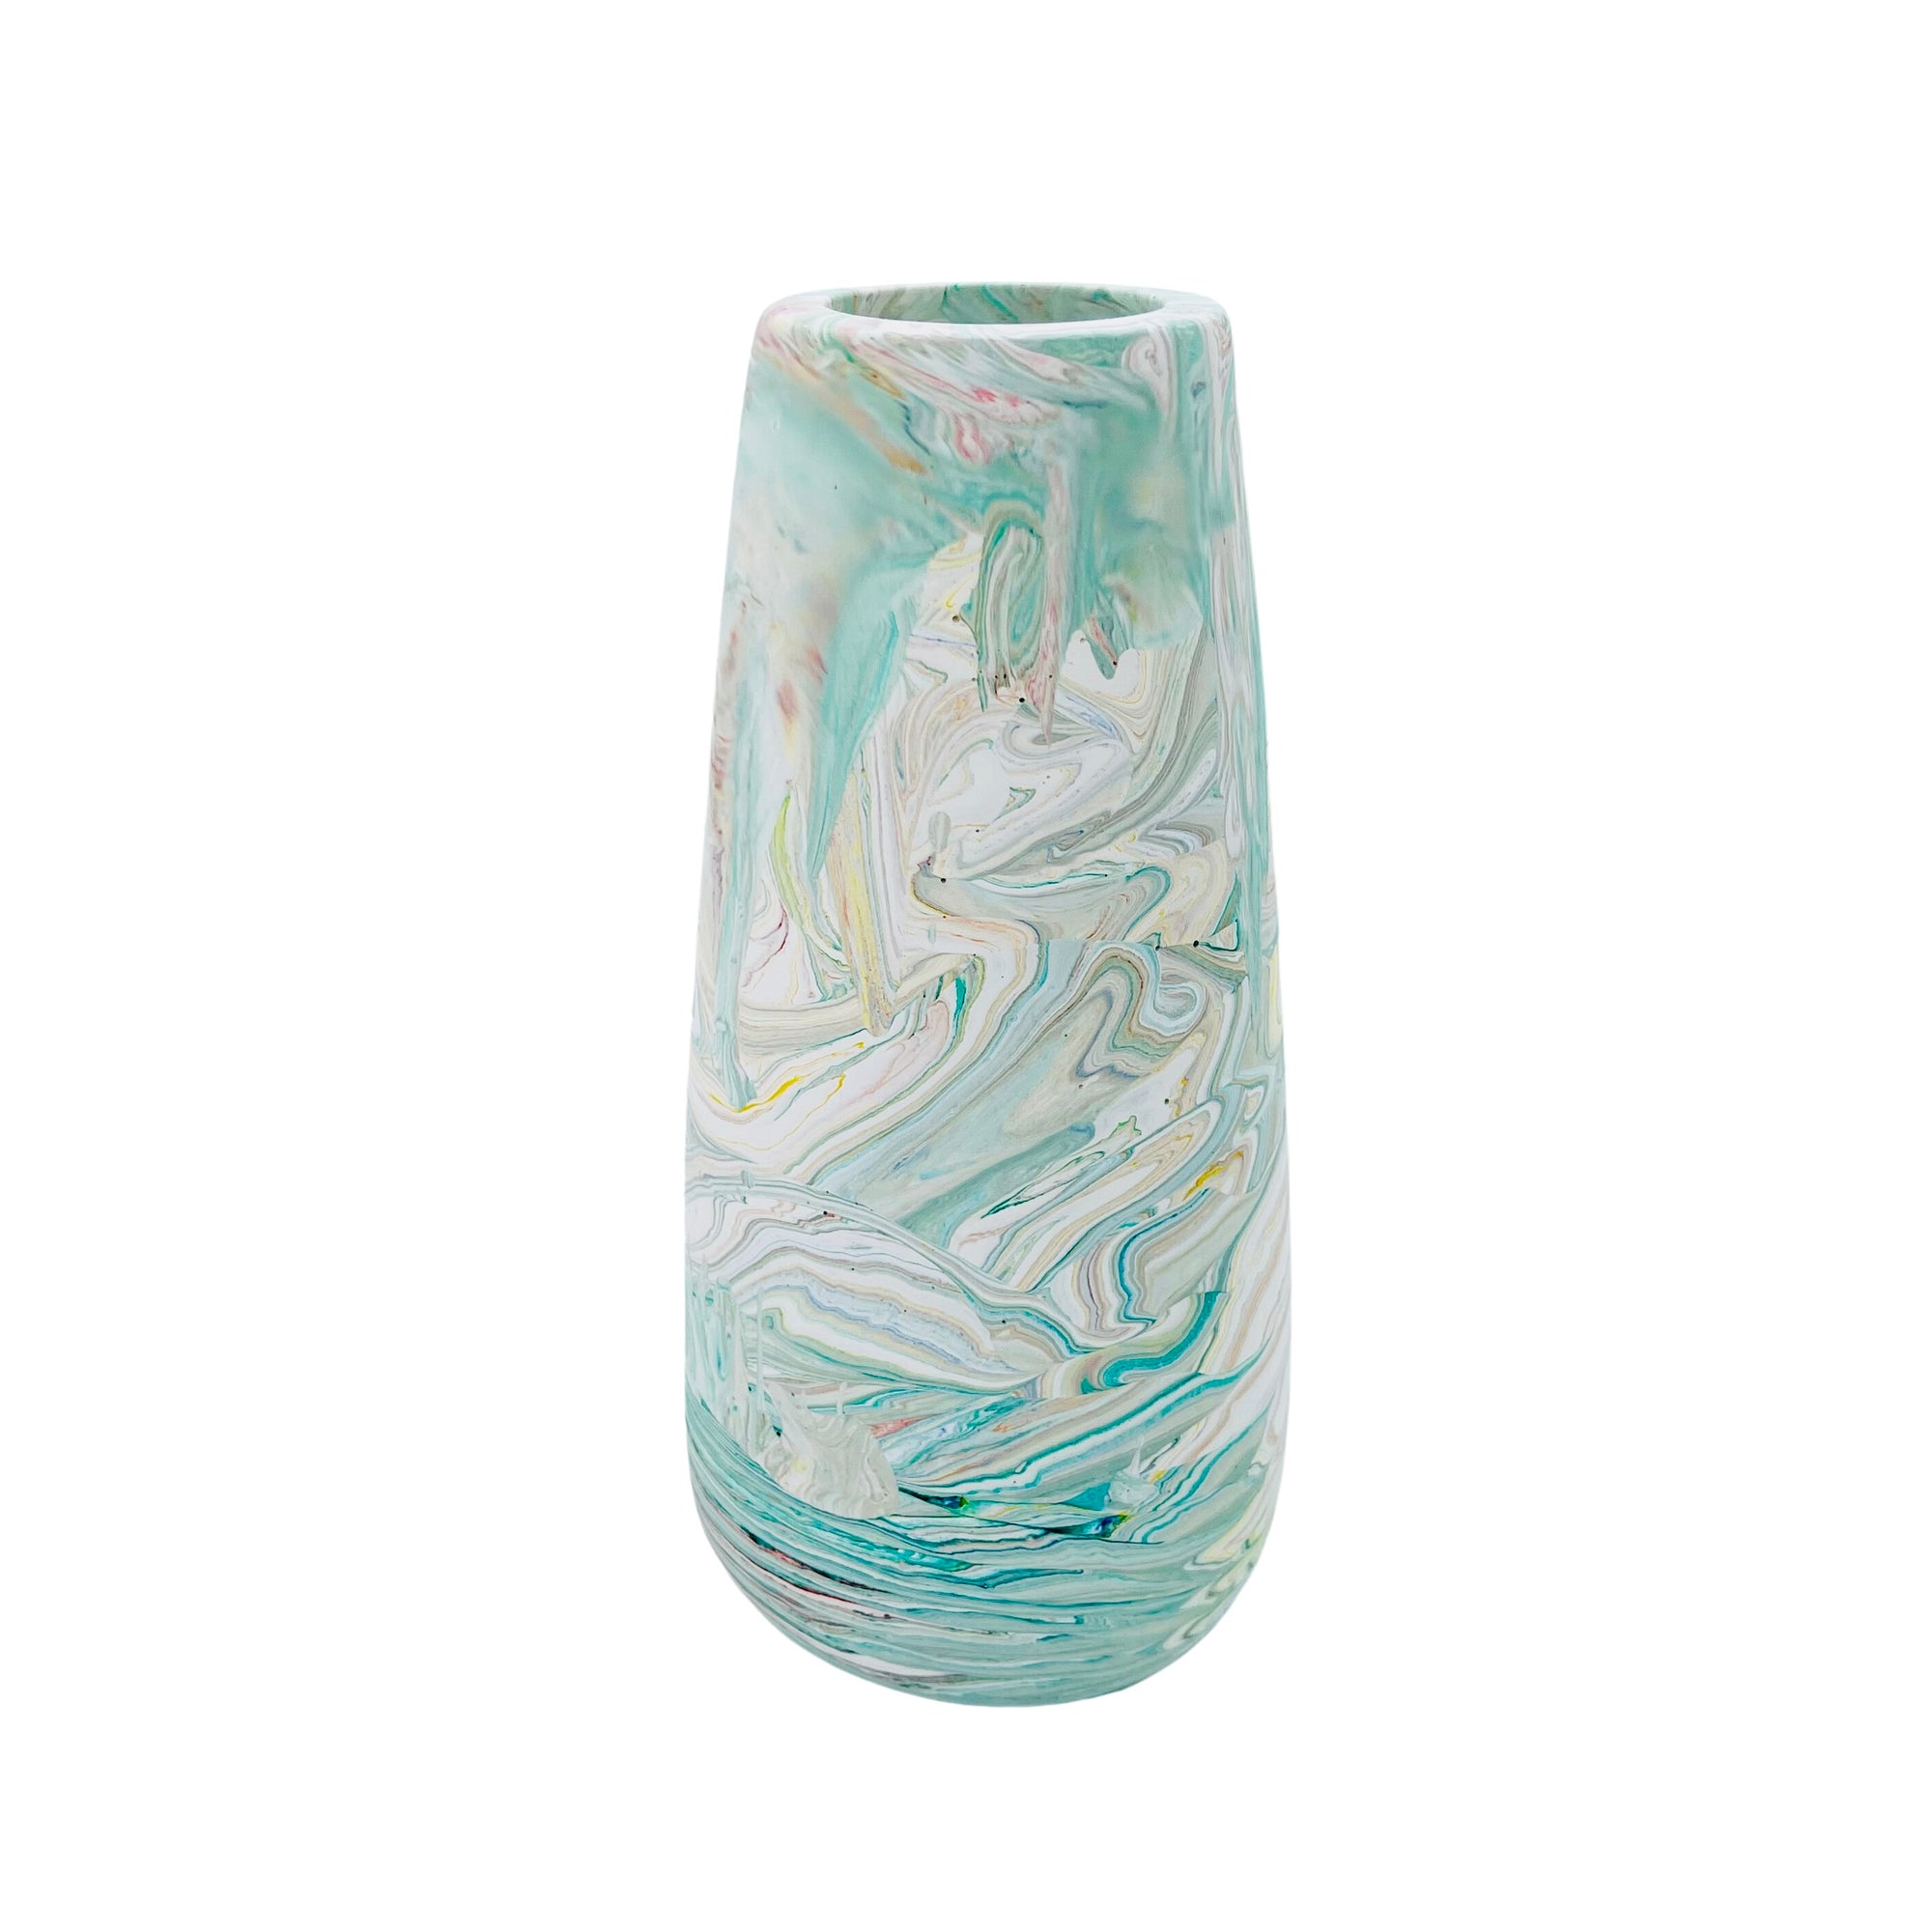 A heavy base vase made from  jesmonite standing 19.5cm in height marbled with turquoise pigment.